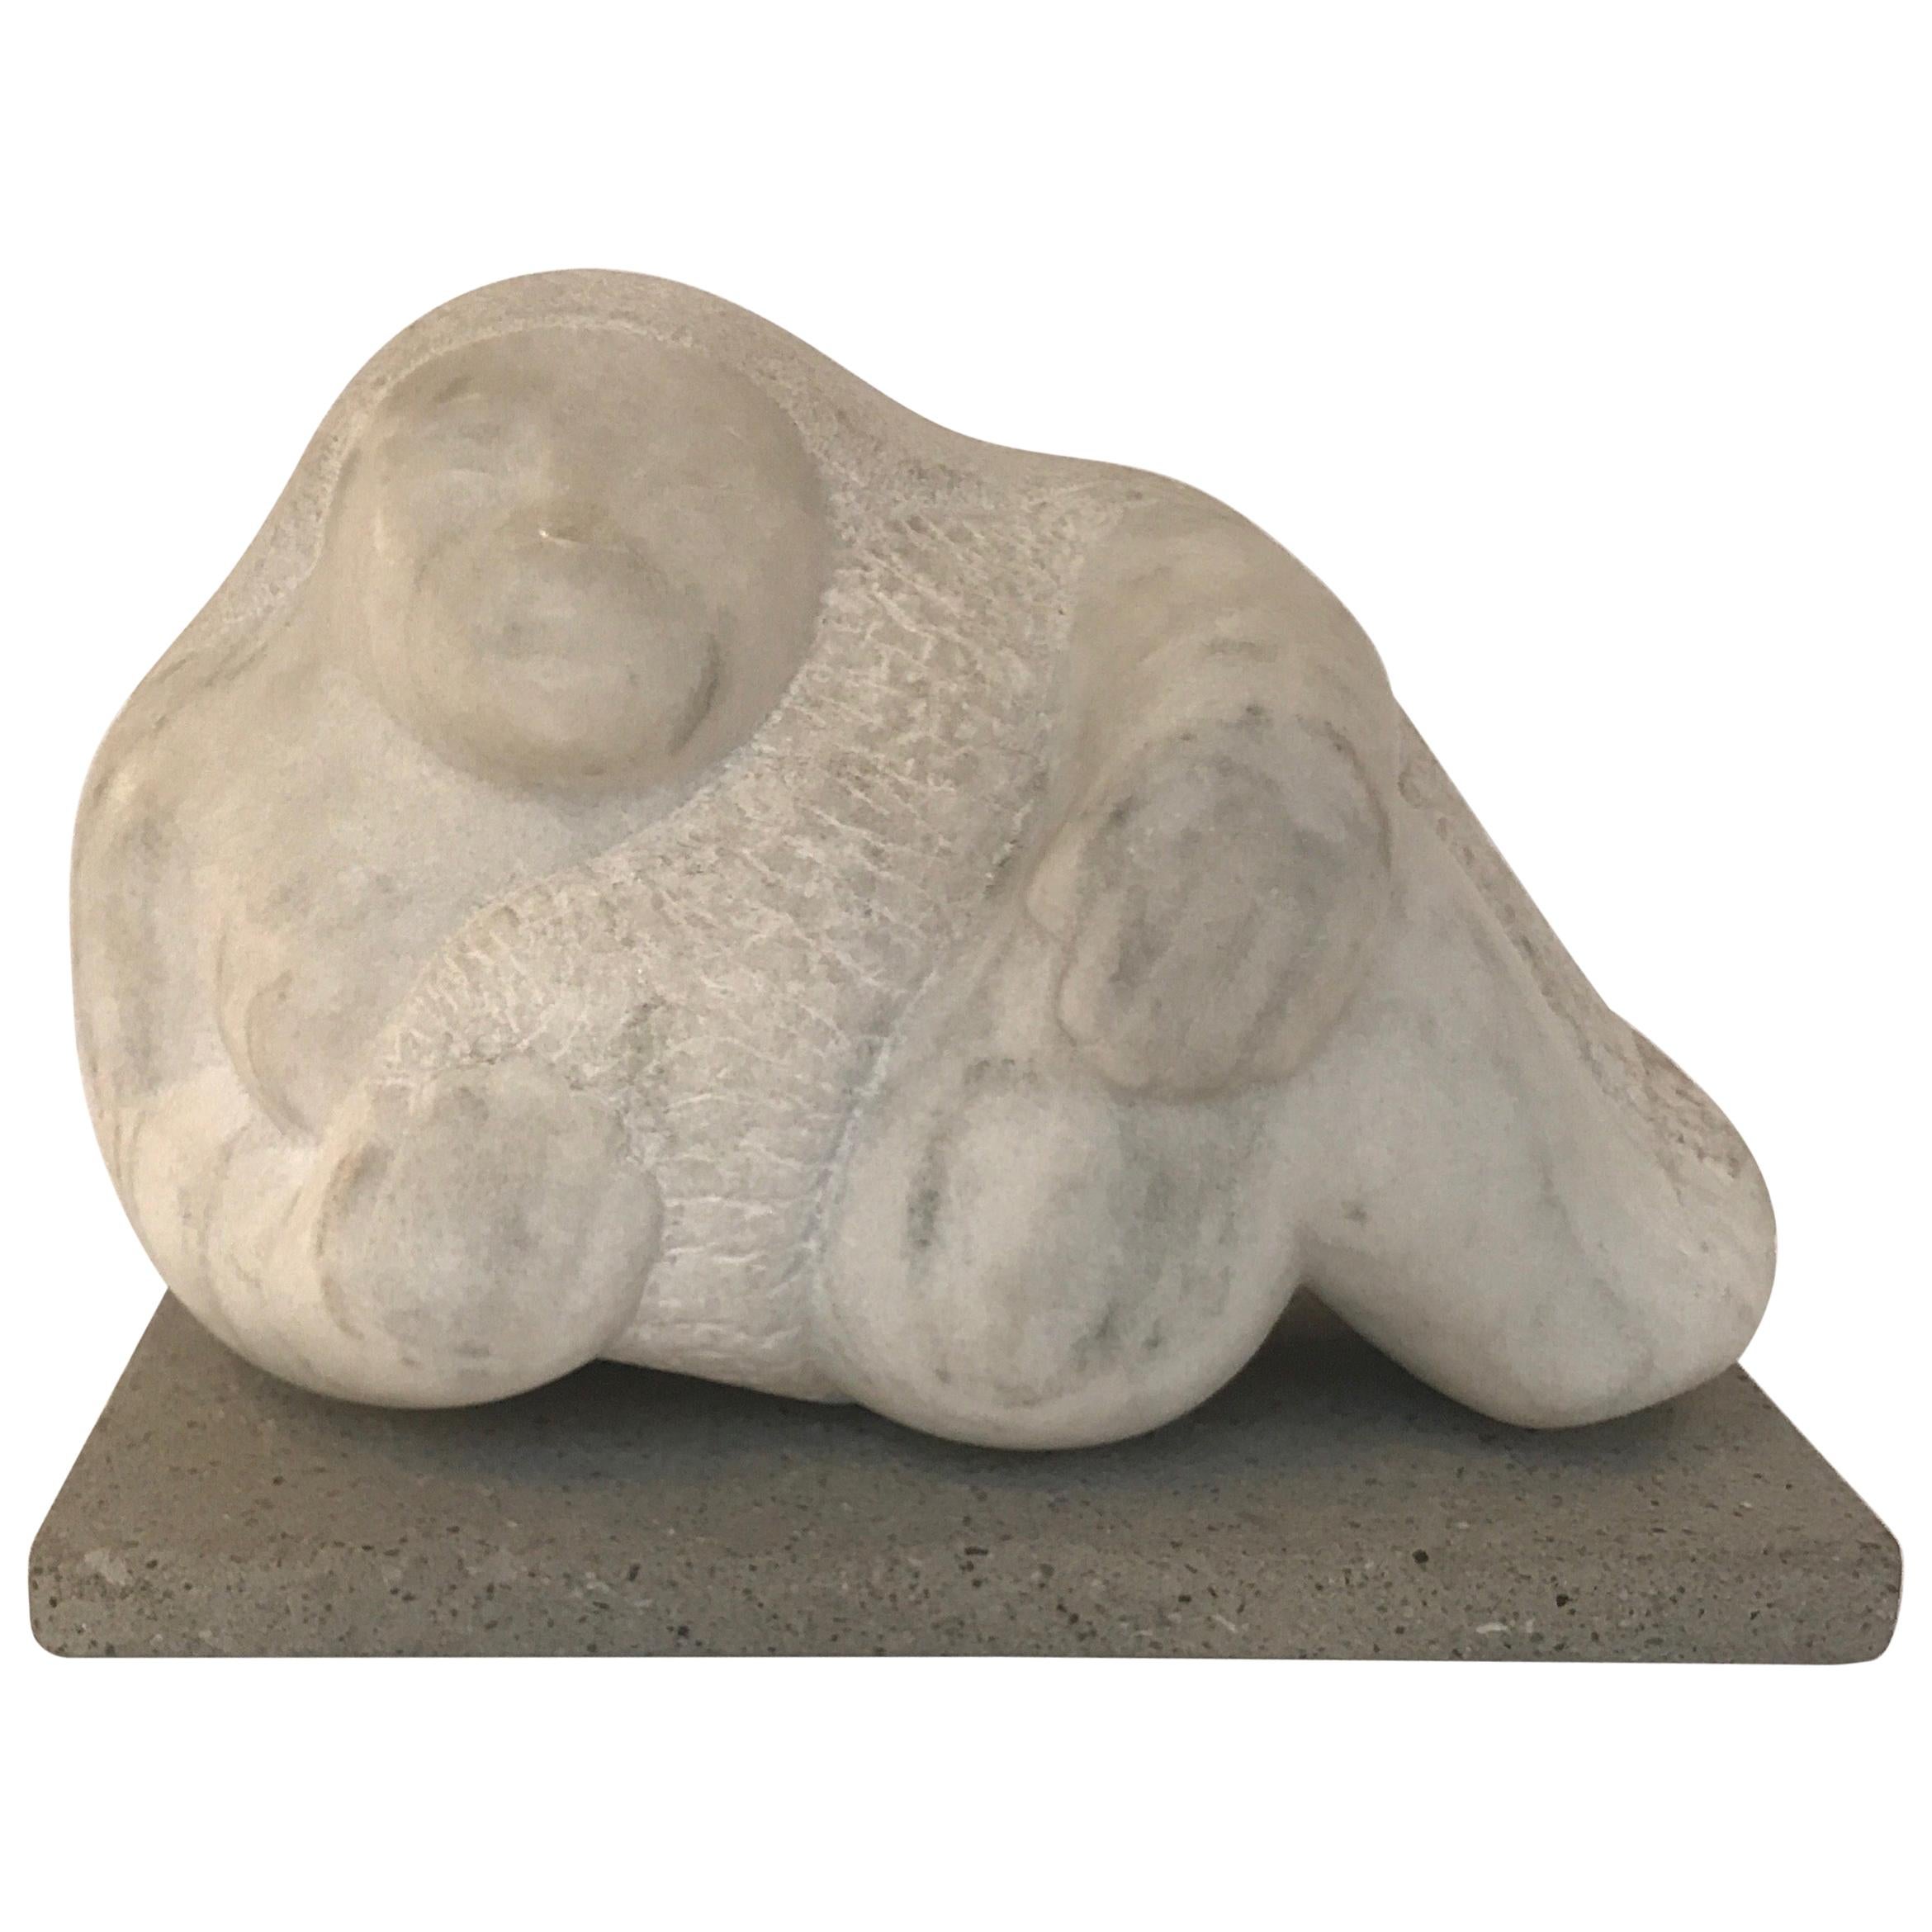 Midcentury Carved Marble Botero Style Reclining Figure Sculpture